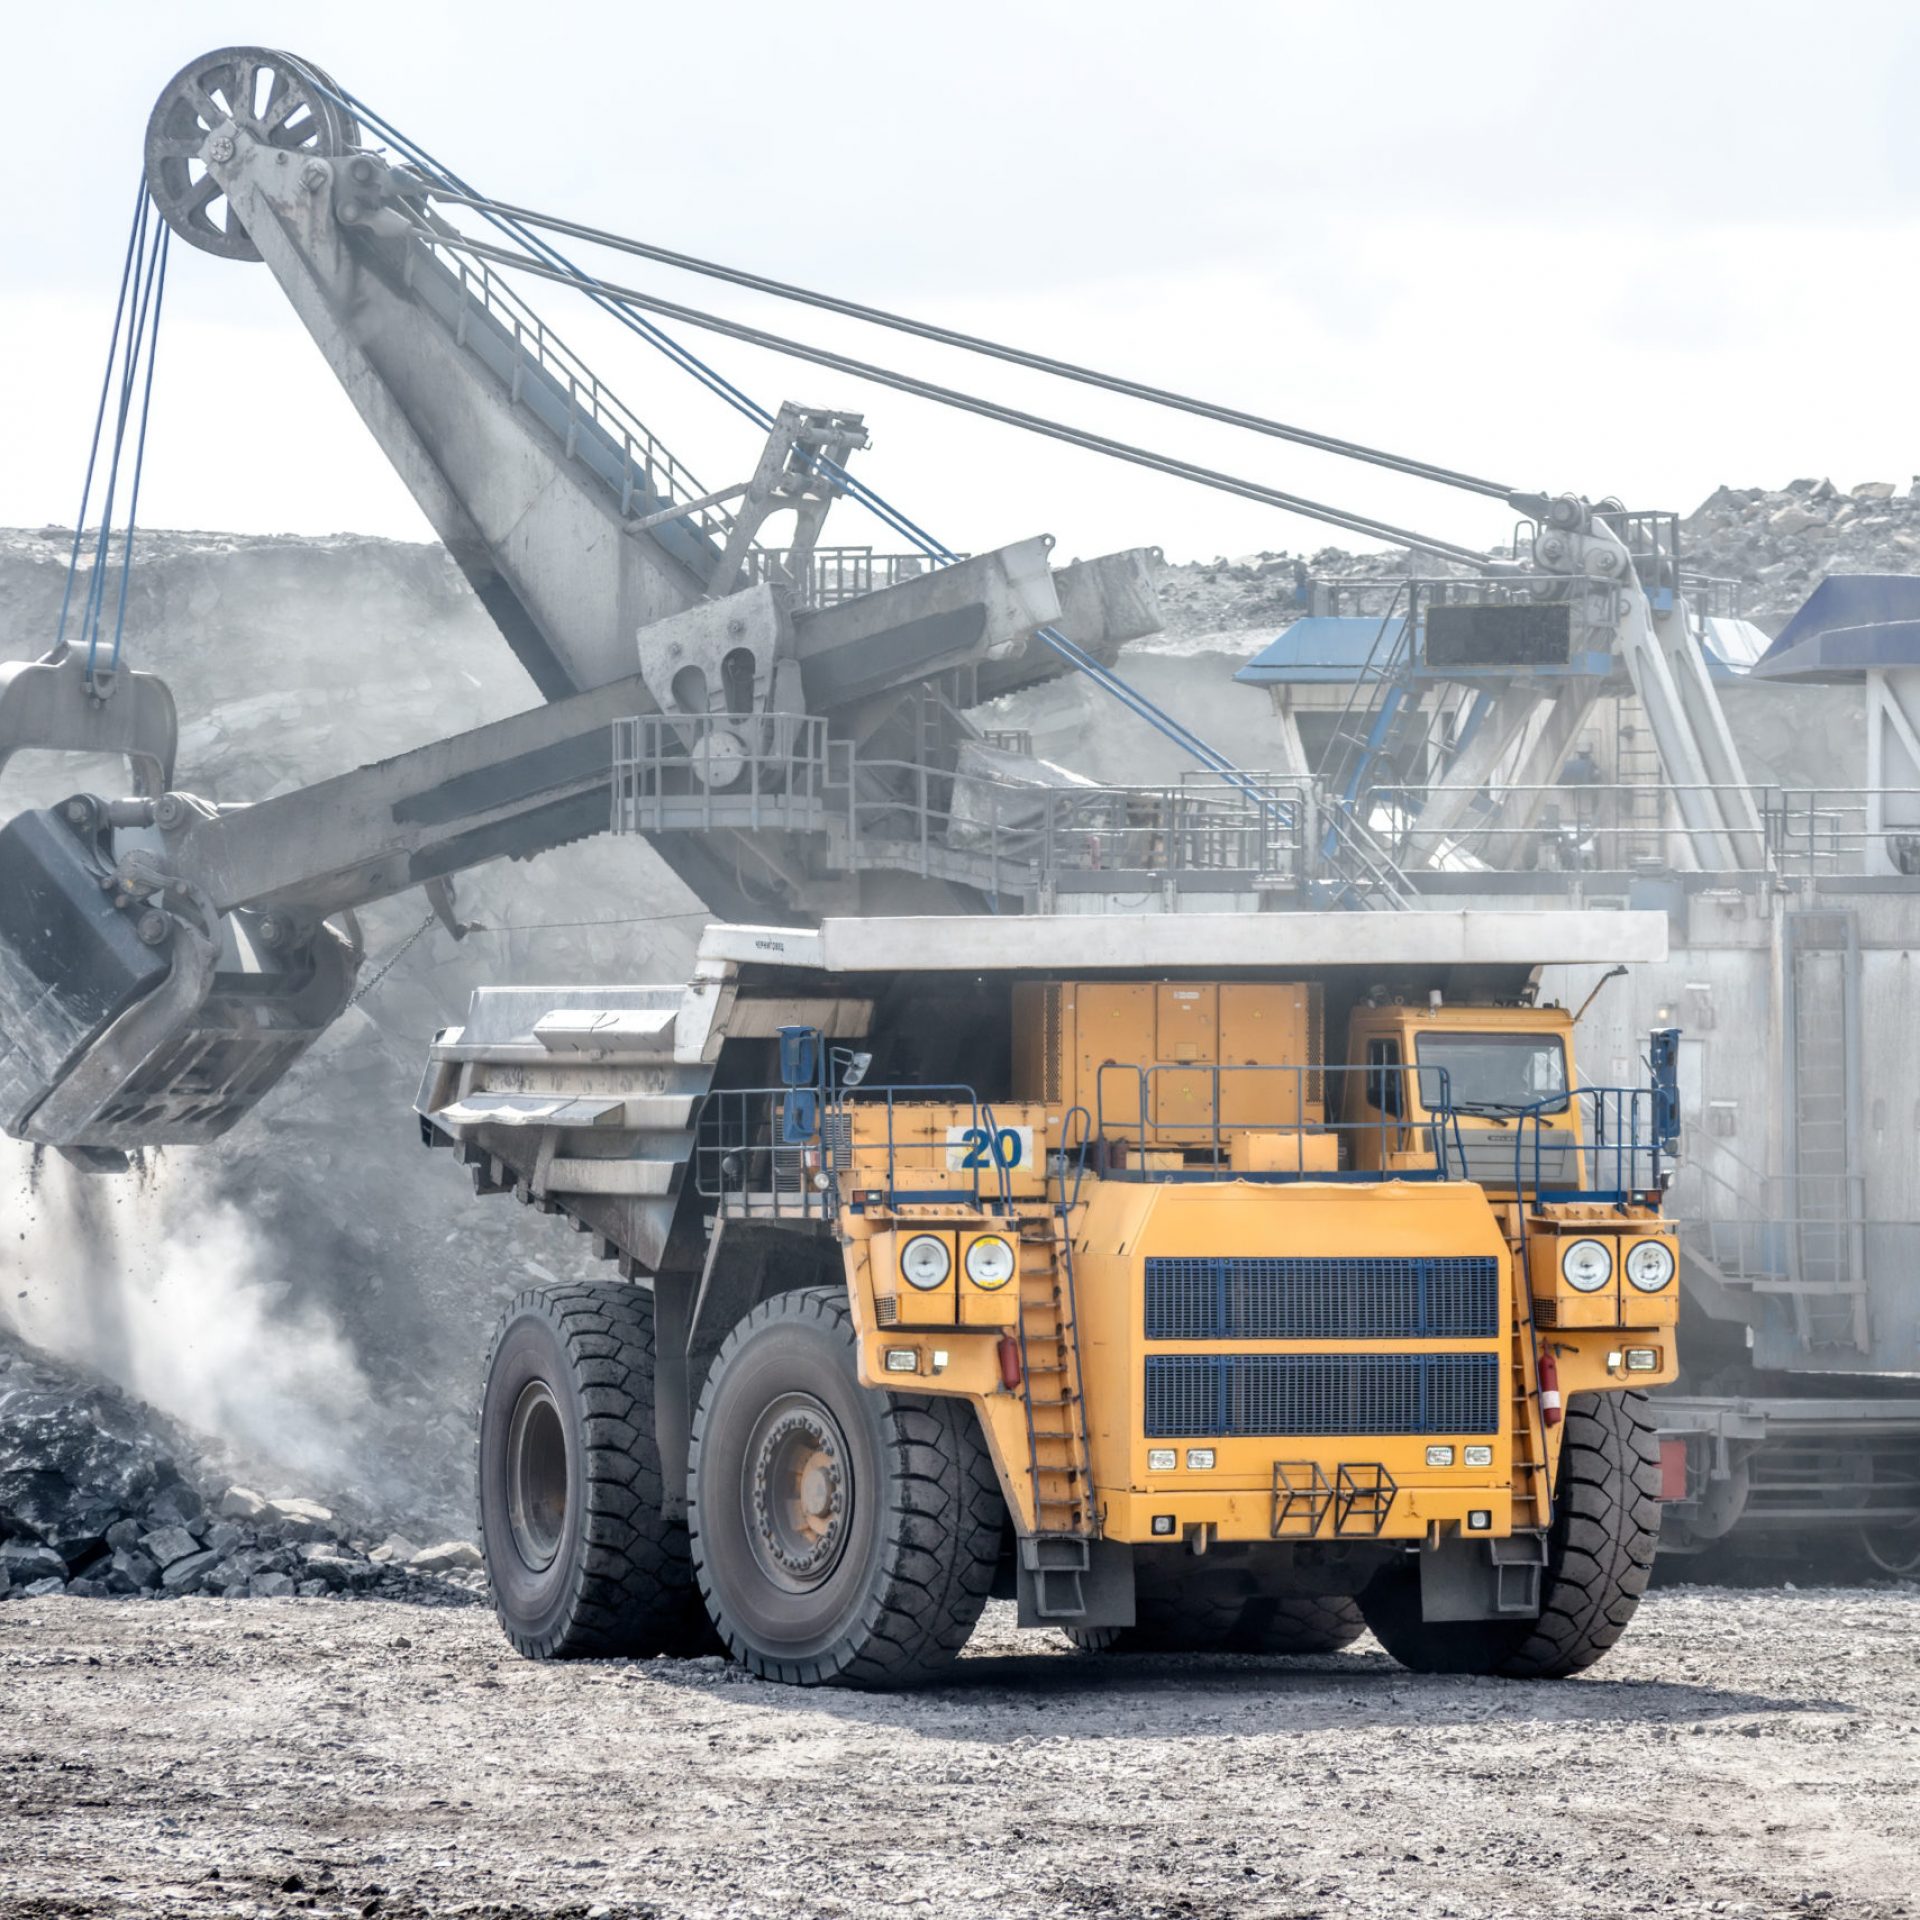 Ore loading with a powerful excavator. Loading a large mining truck. Mining operations in the face of a quarry.